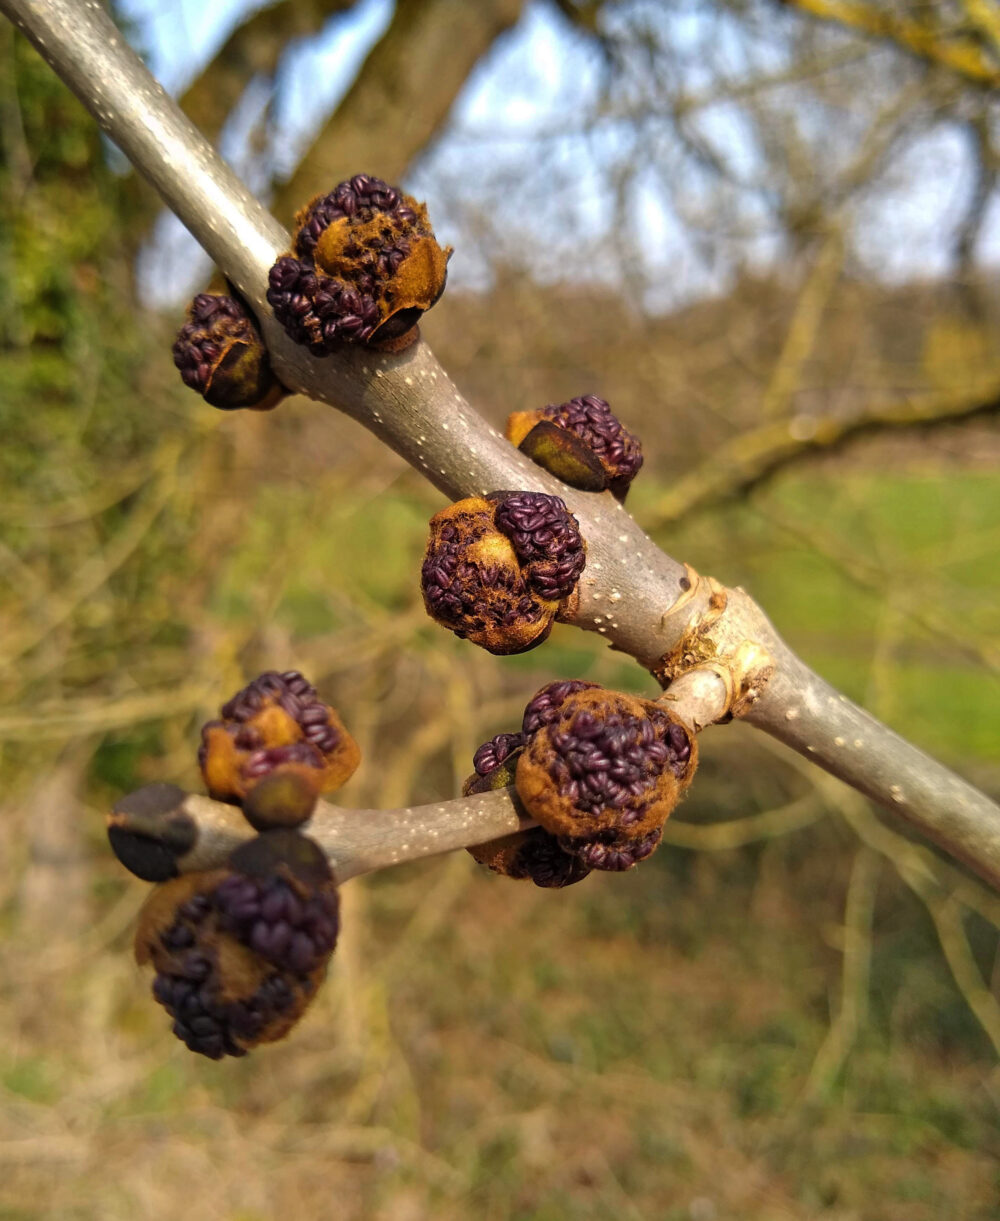 Ash Tree About To Burst Into Flower, Kirkstall, 22nd March 2022